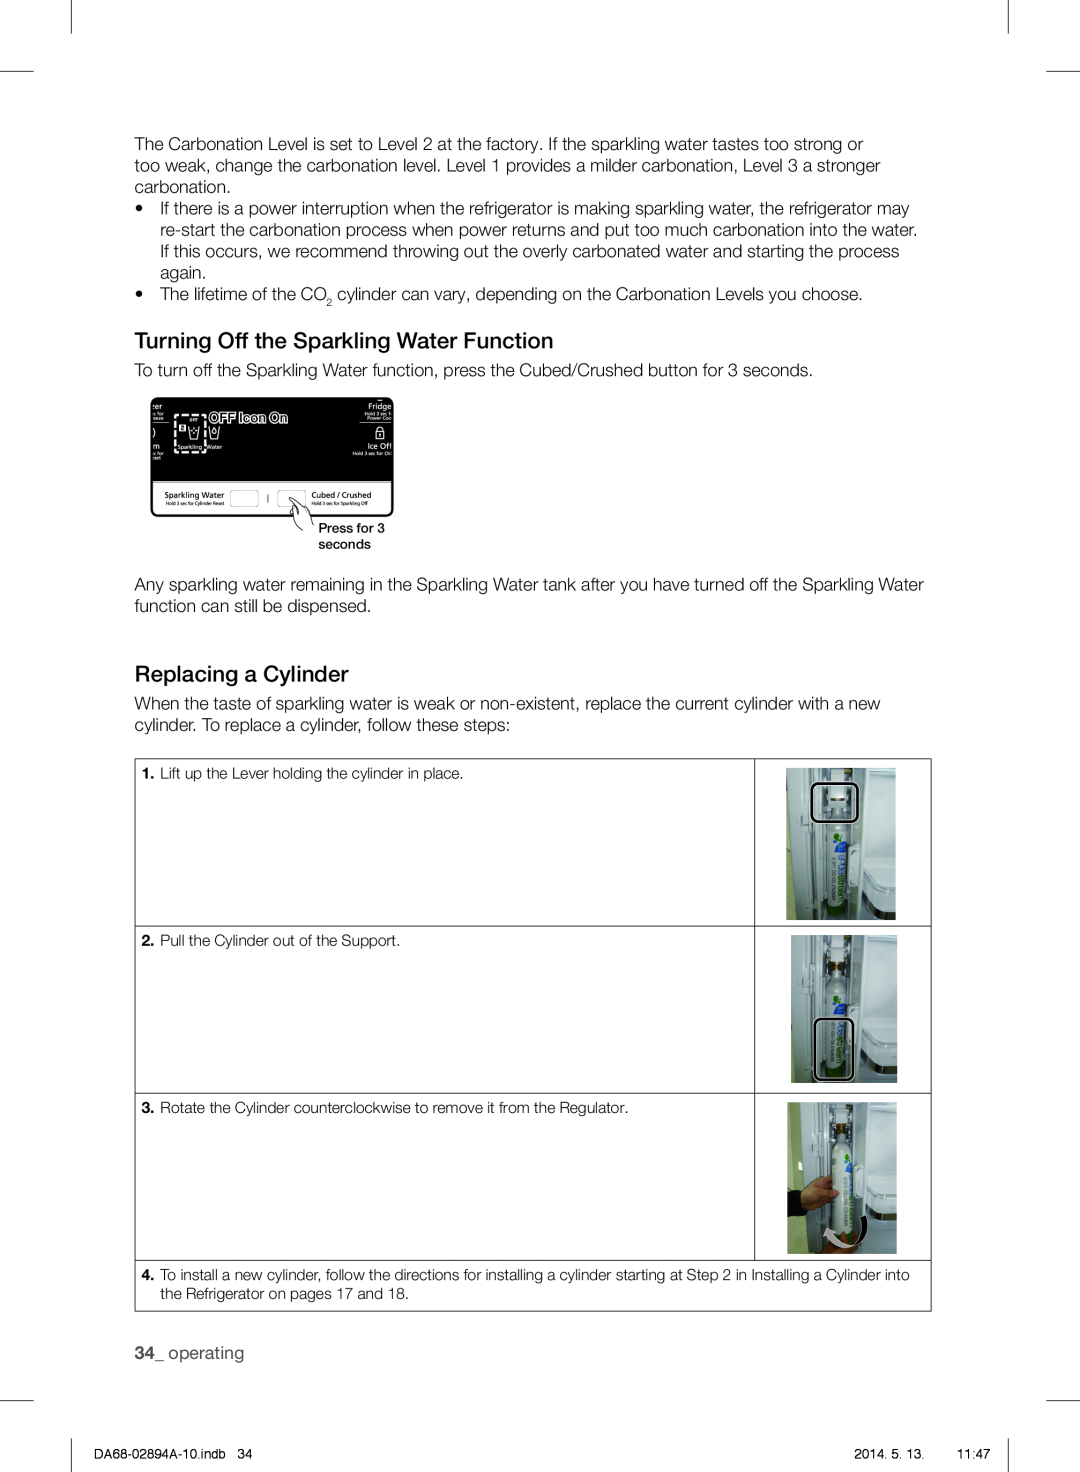 Samsung RF31FMESBSR user manual Turning Off the Sparkling Water Function, Replacing a Cylinder, 34_ operating 